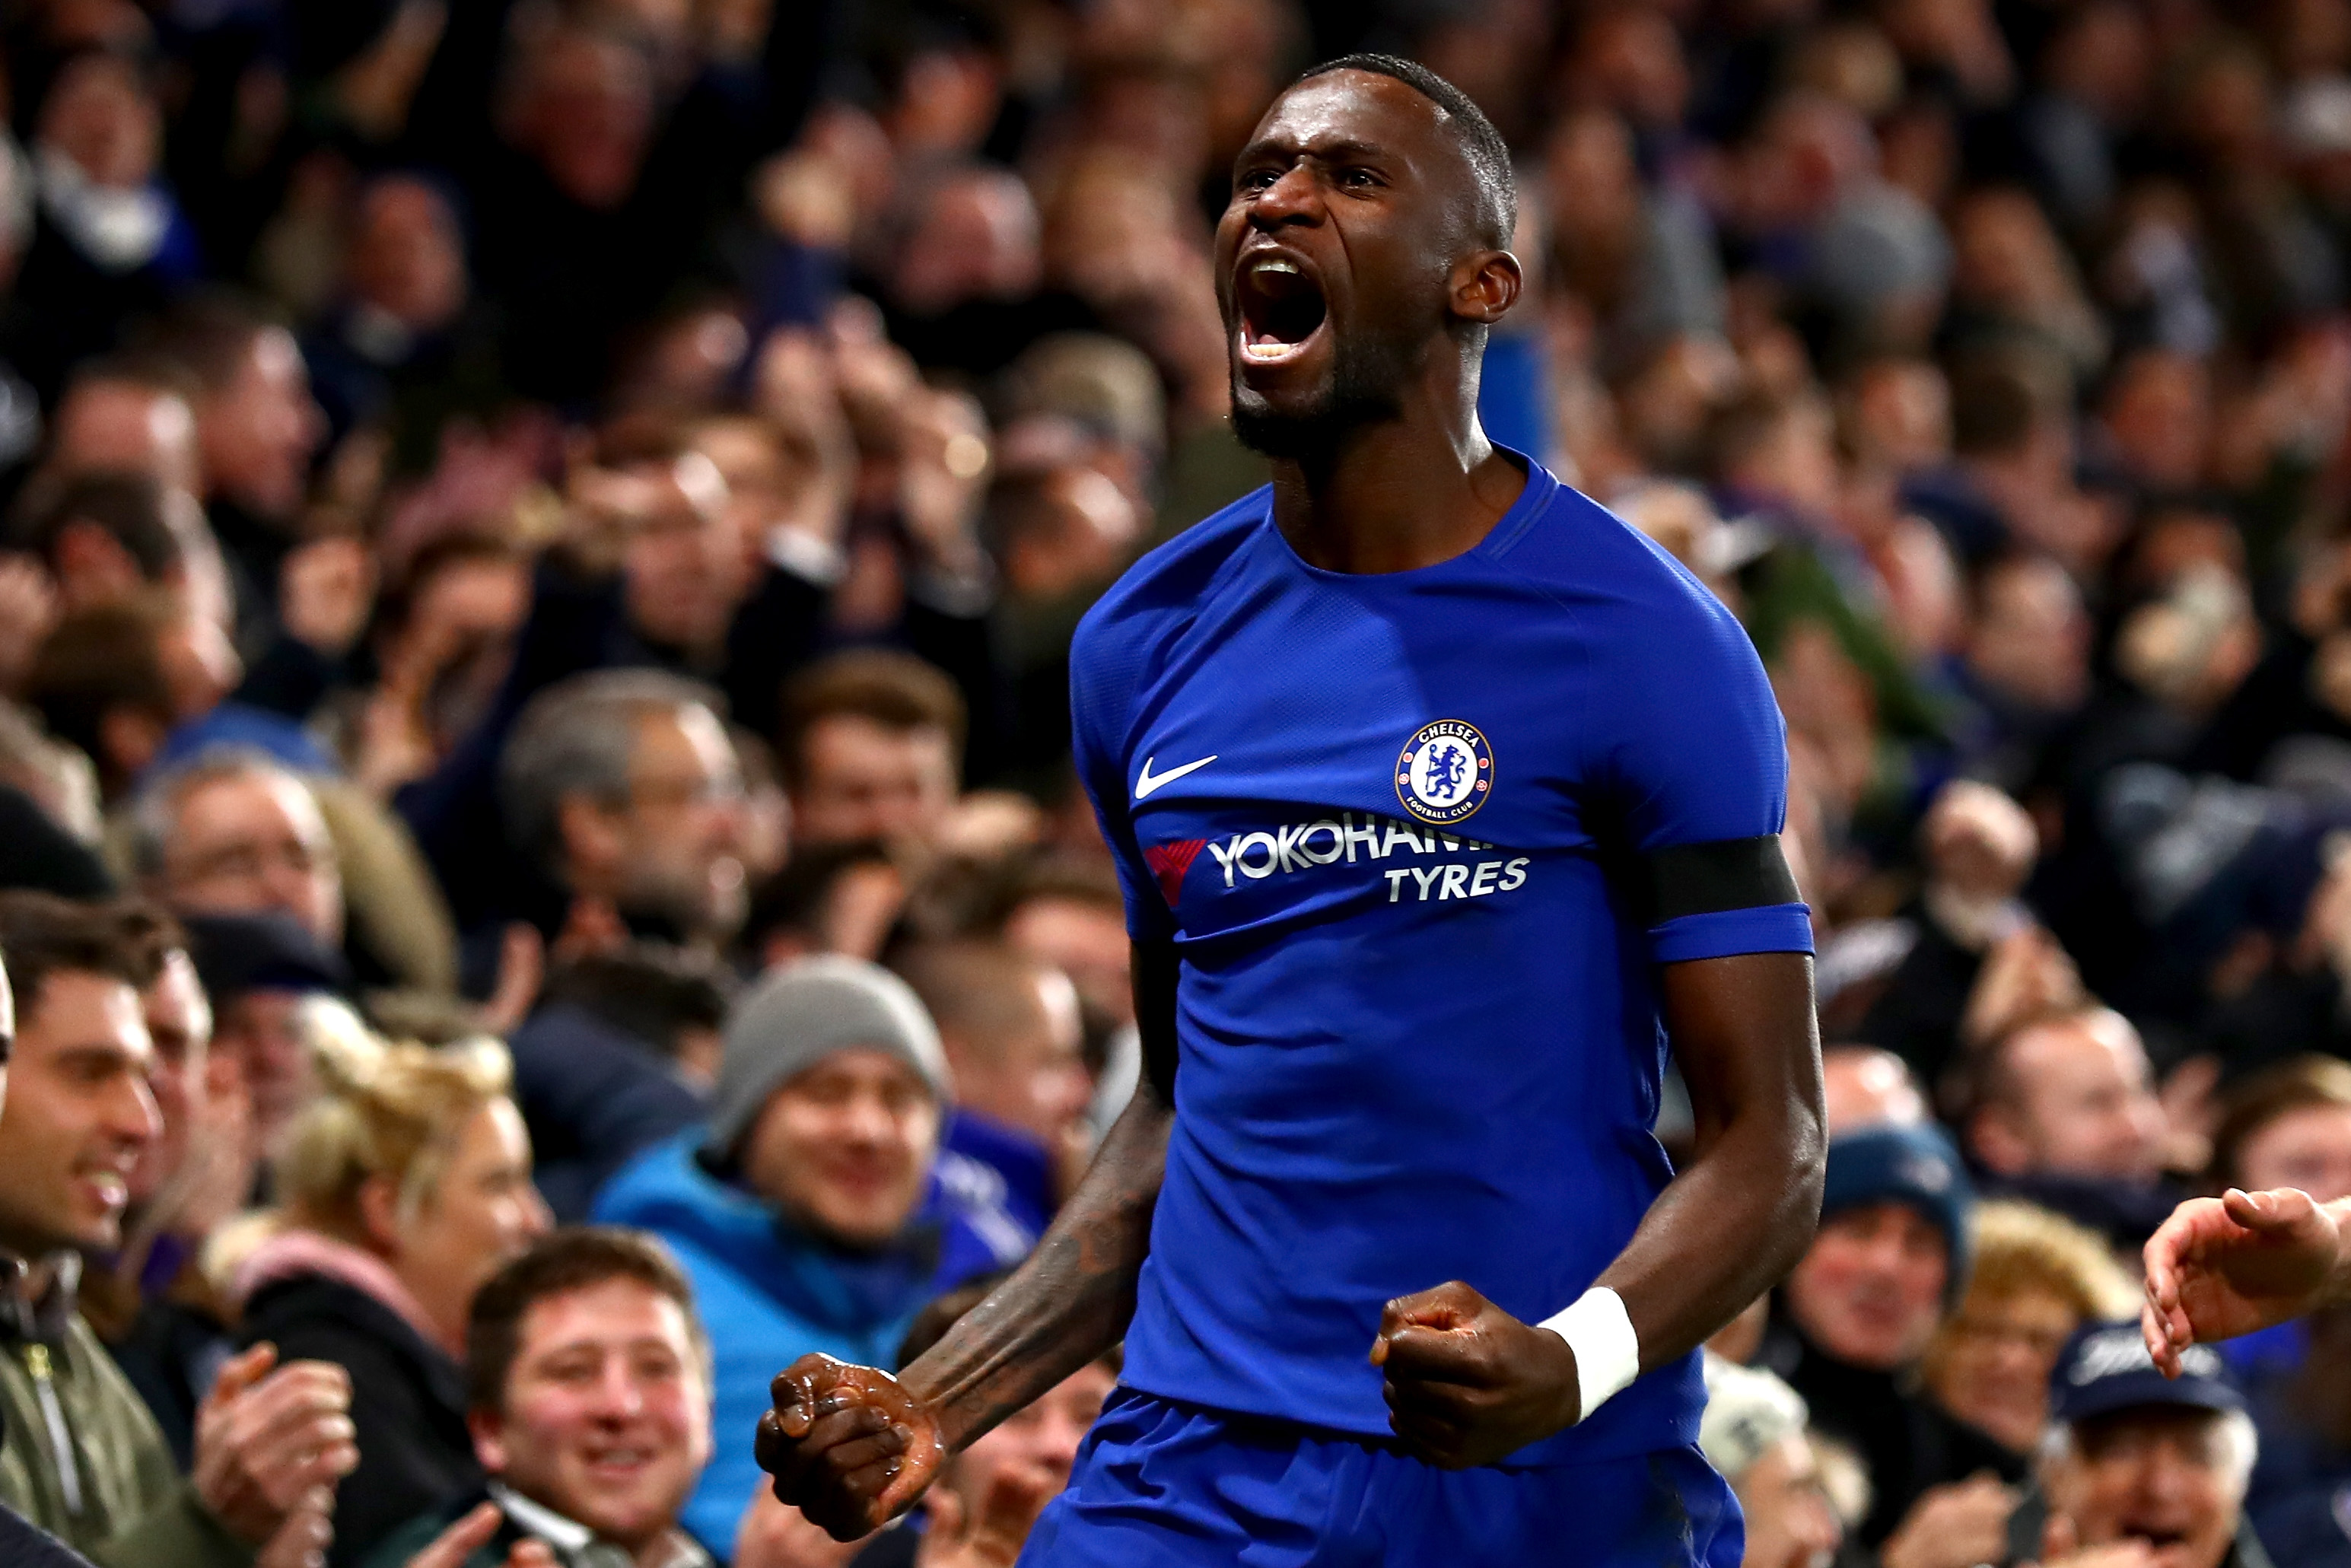 LONDON, ENGLAND - NOVEMBER 29:  Antonio Rudiger of Chelsea celebrates after scoring his sides second goal during the Premier League match between Chelsea and Swansea City at Stamford Bridge on November 29, 2017 in London, England  (Photo by Clive Rose/Getty Images)